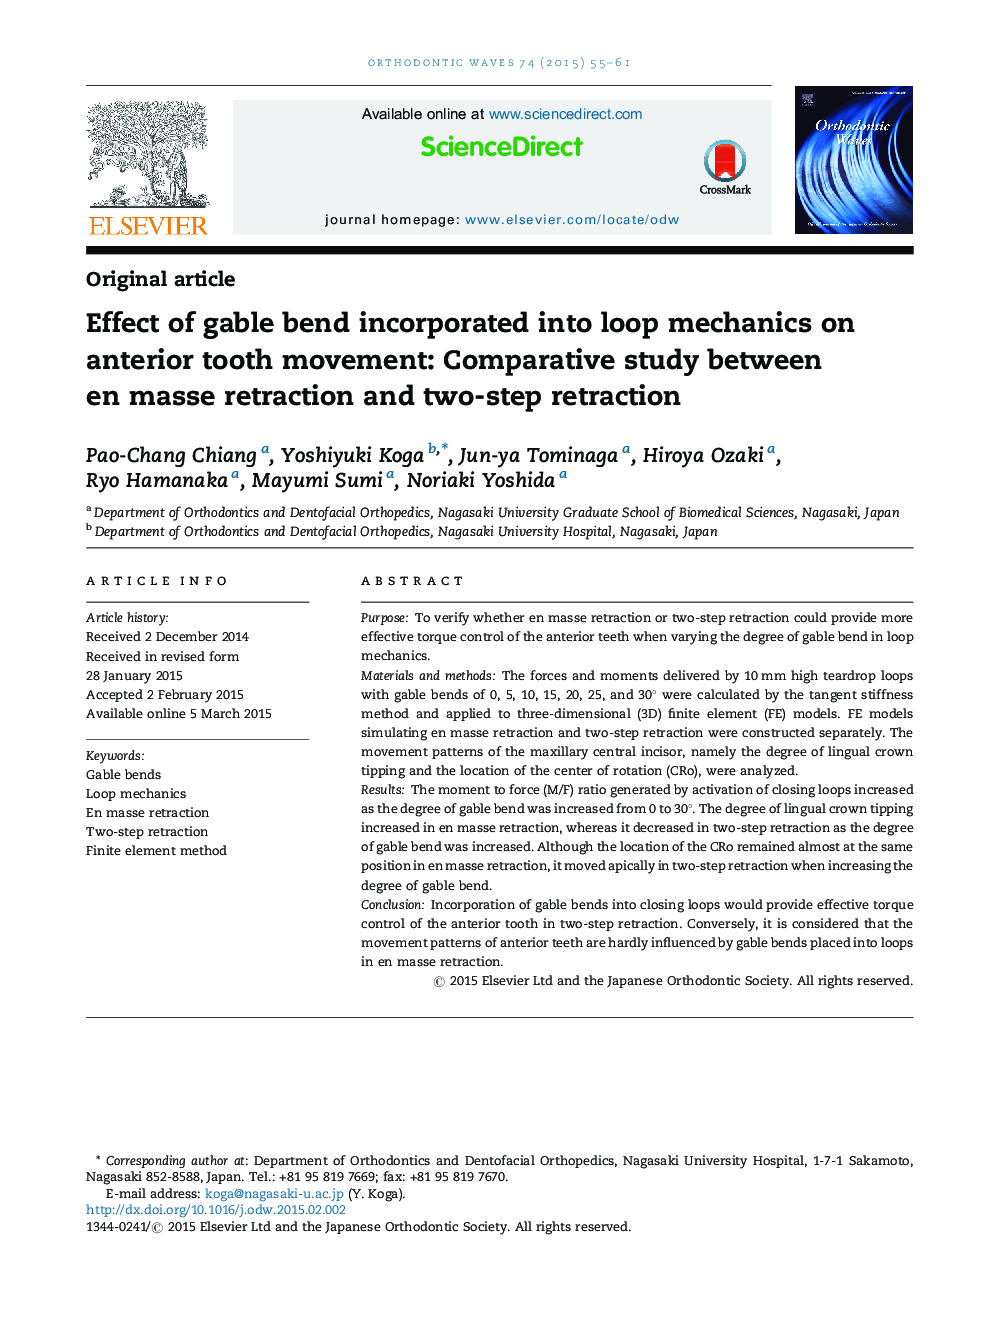 Effect of gable bend incorporated into loop mechanics on anterior tooth movement: Comparative study between en masse retraction and two-step retraction